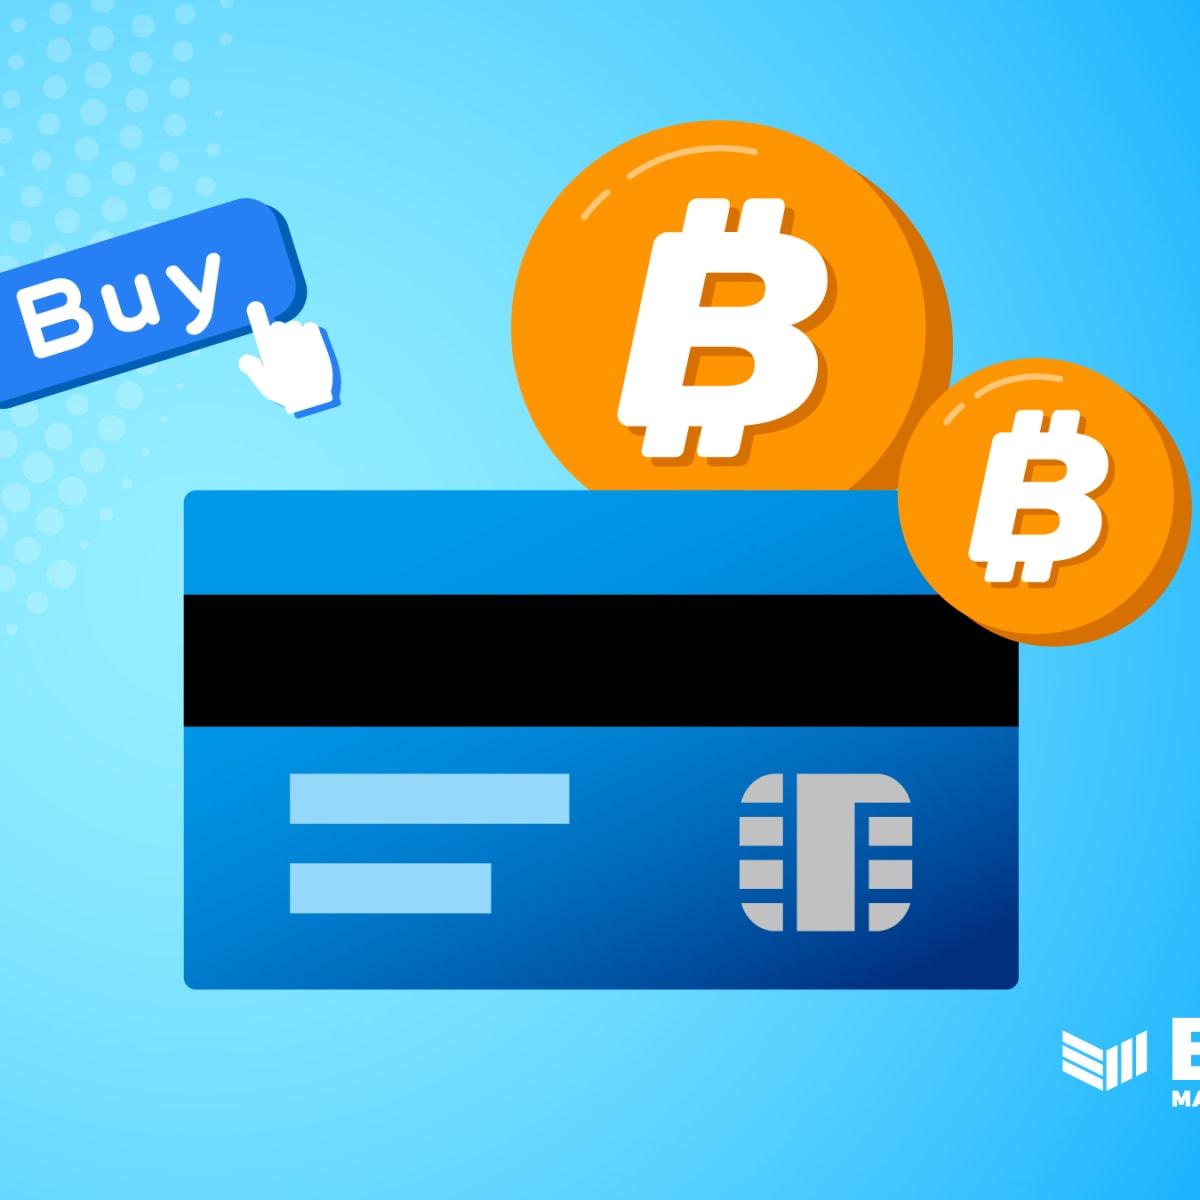 Buy Bitcoin with Credit or Debit Card | Buy BTC Instantly